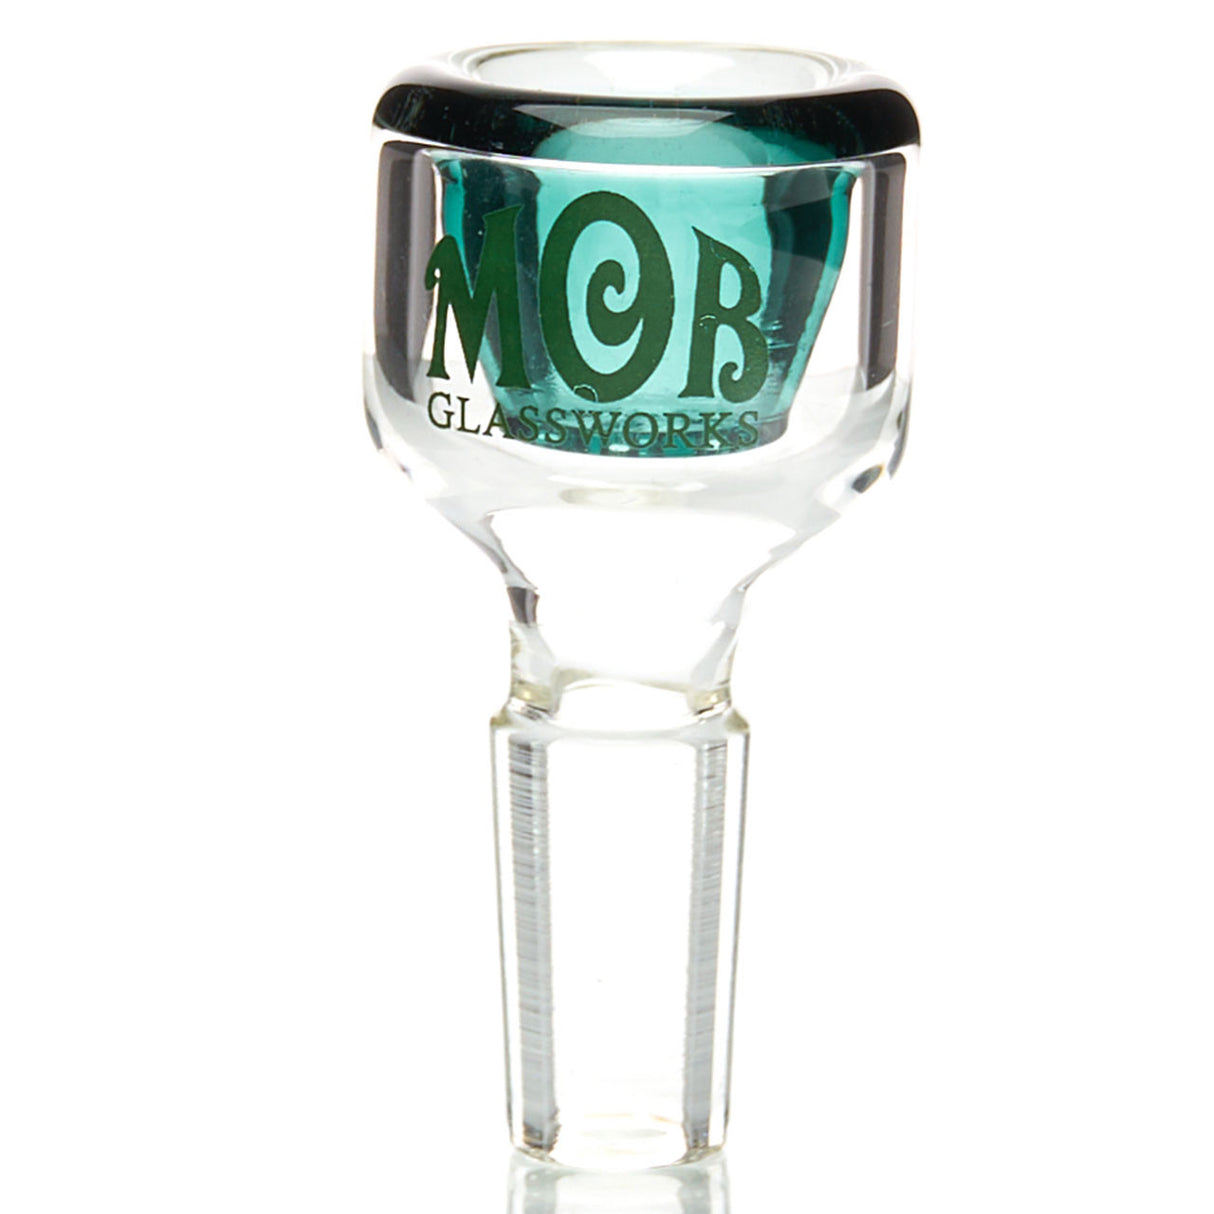 MOB Glass 5-Hole 14mm Slide with Colored Glass and Groundless 14mm Joint